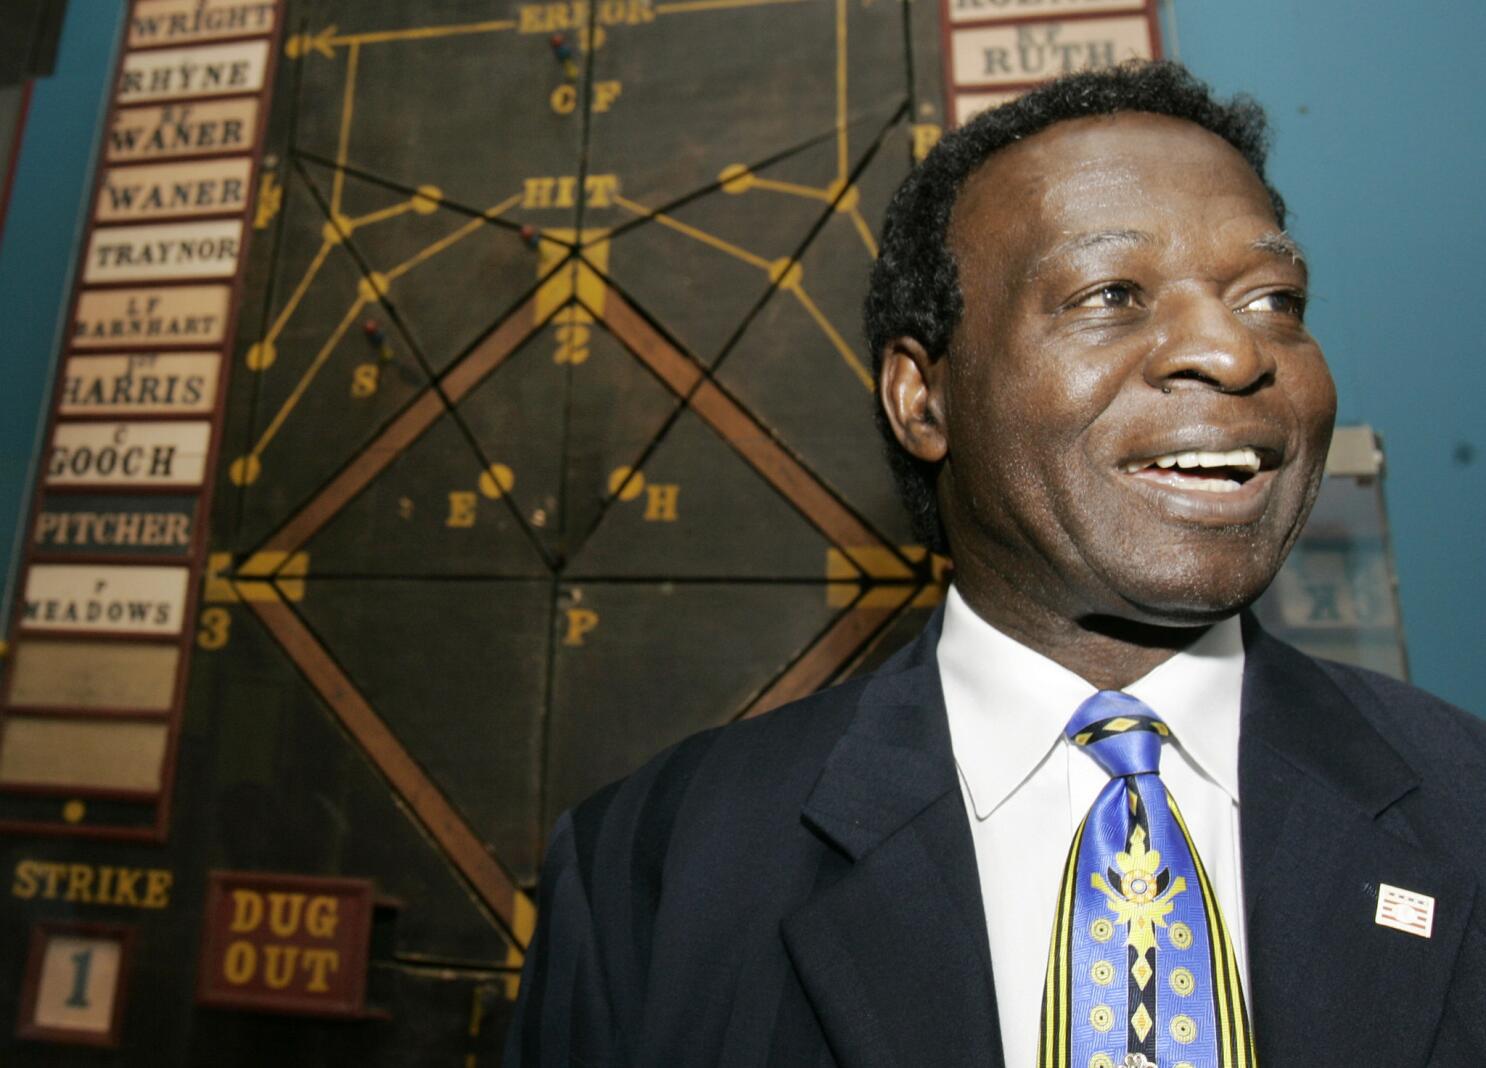 Cardinals Hall of Famer Lou Brock loses part of leg to infection